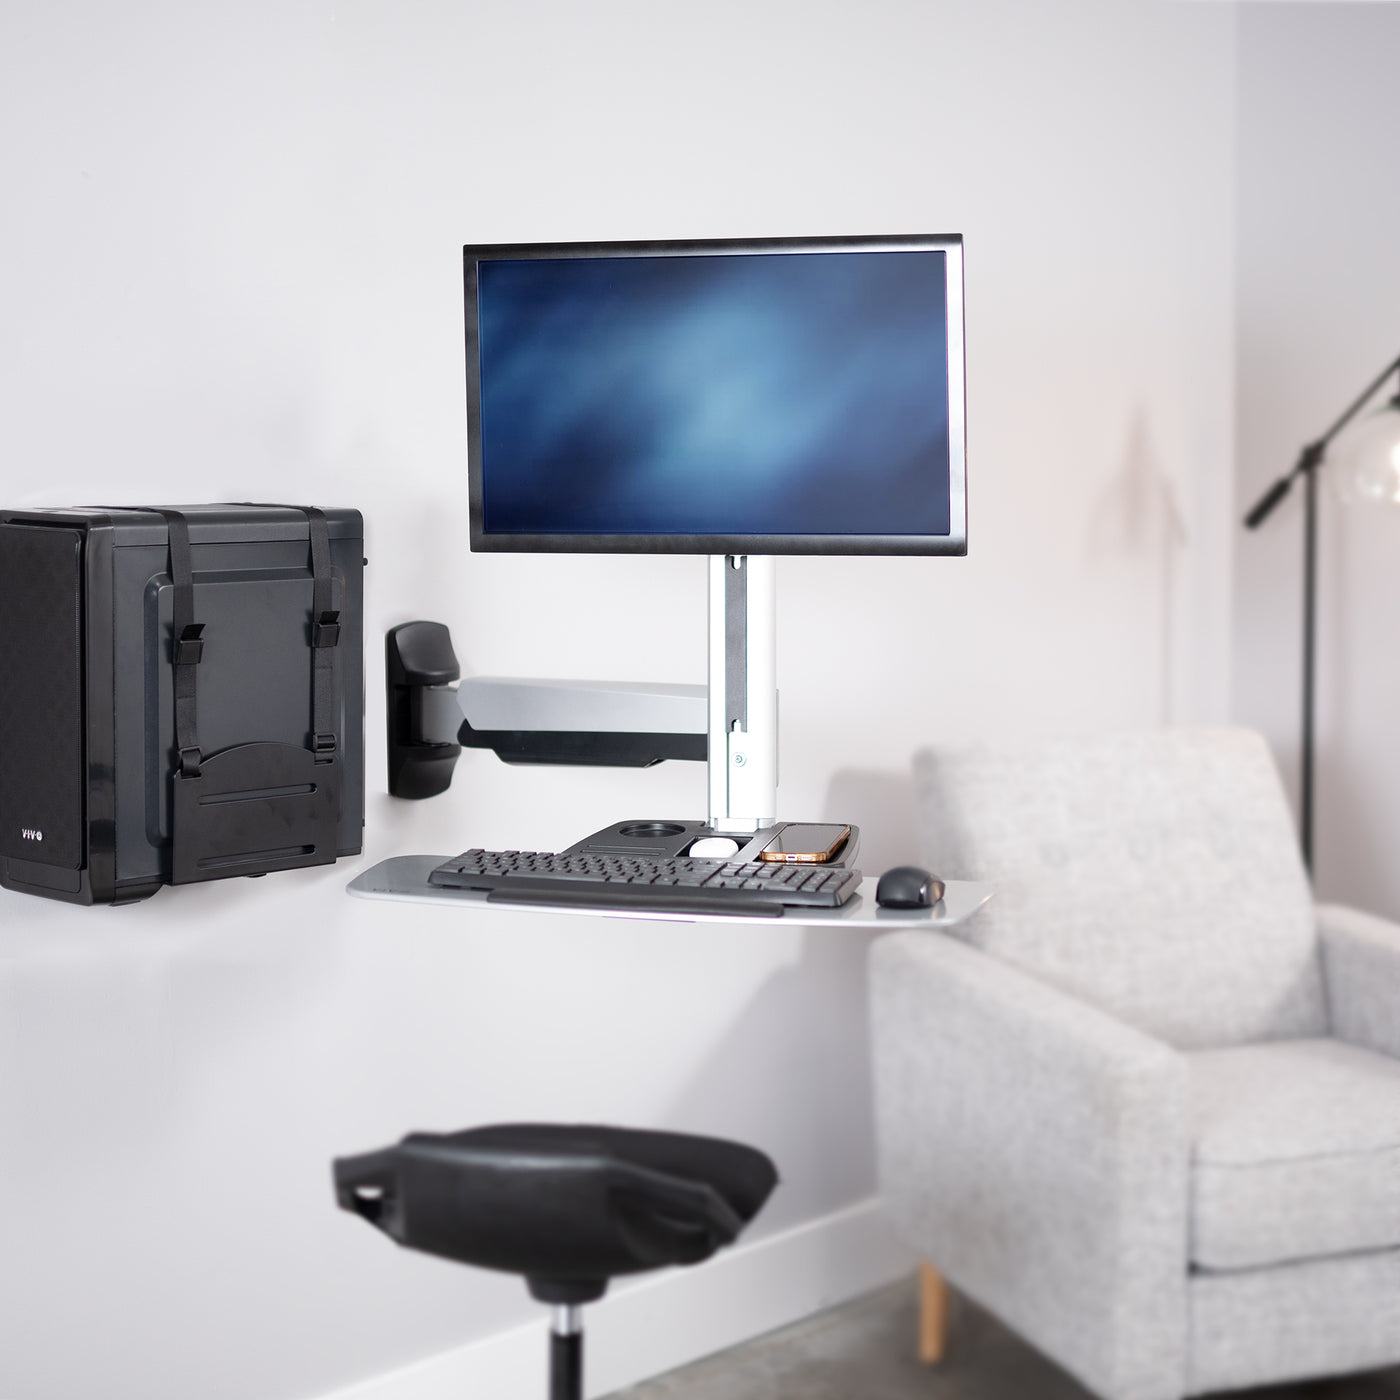 Sturdy silver ergonomic single monitor sit to stand wall mount workstation with keyboard tray.